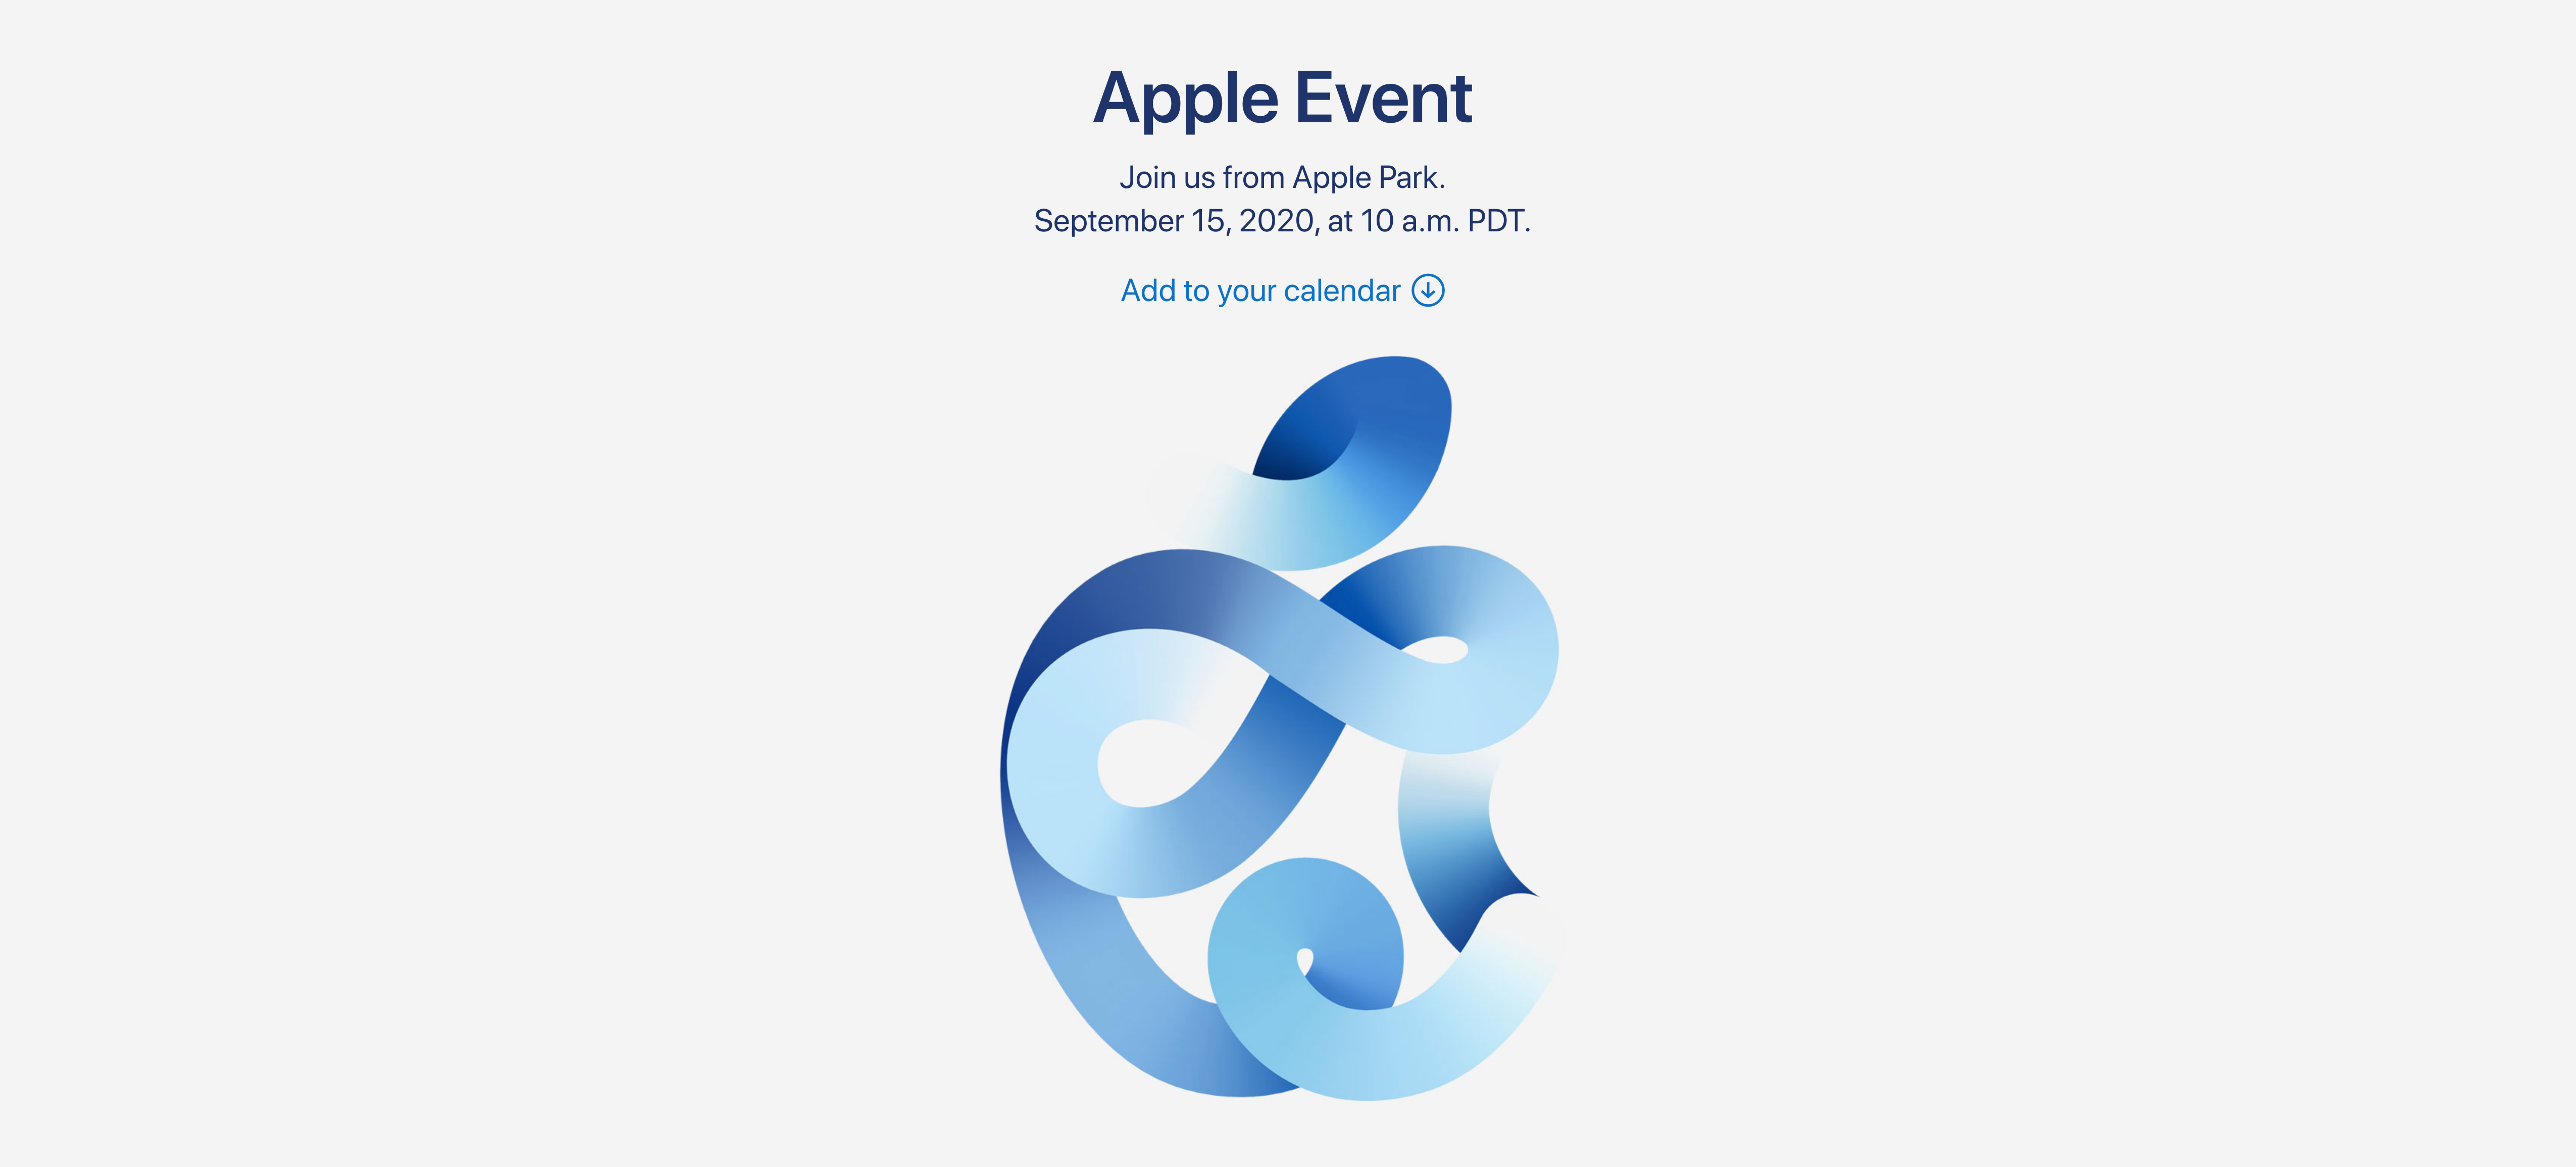 What we’ll see at Apple’s September 15th event